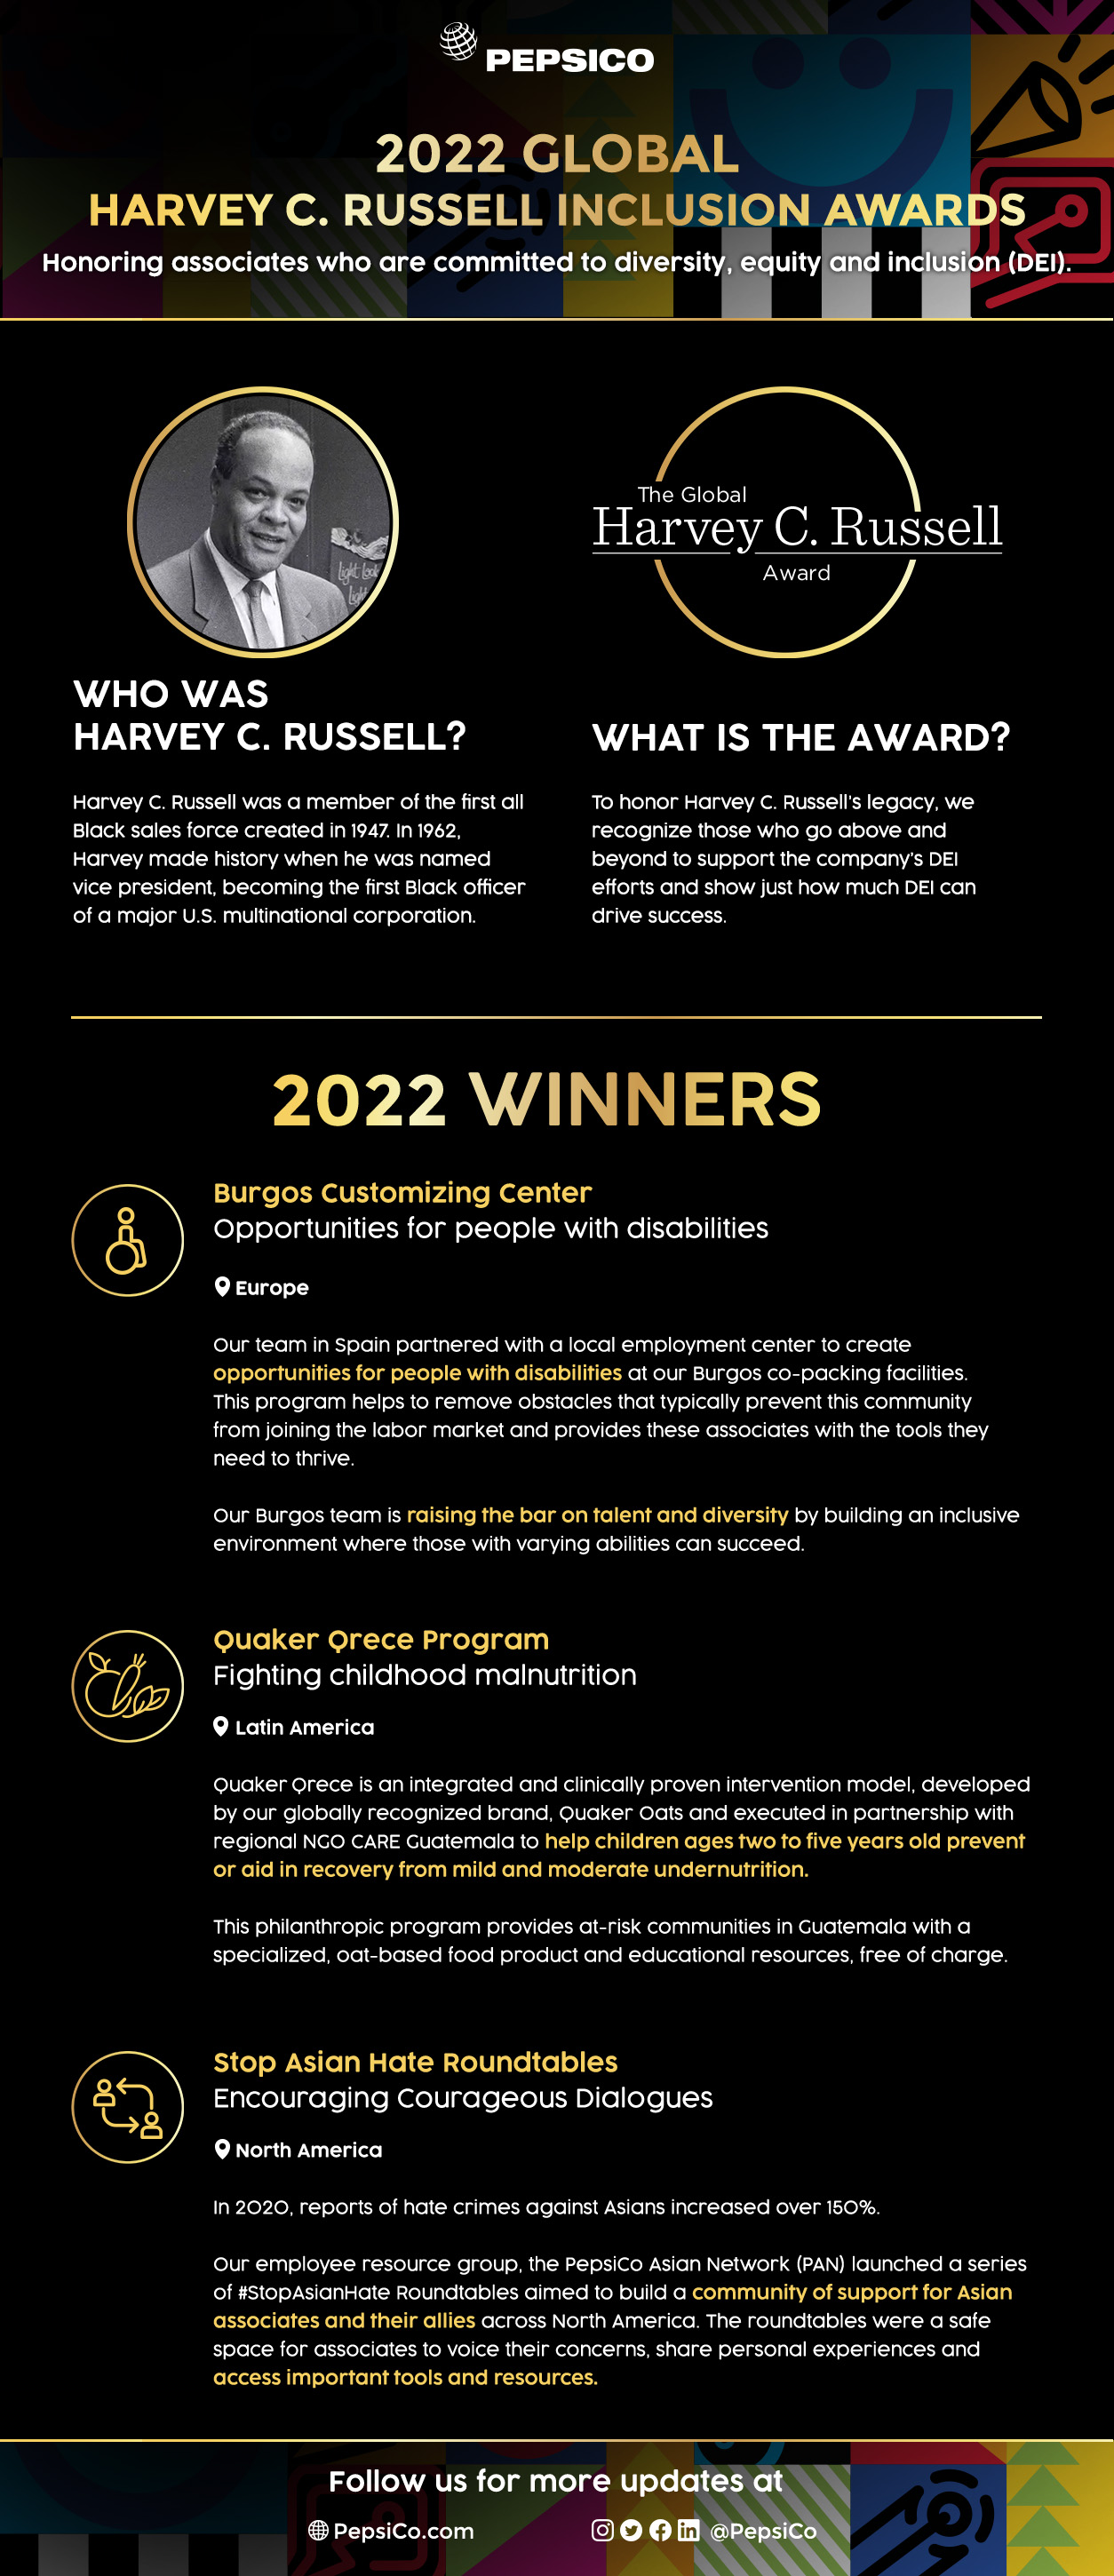 Infographic showing the 2022 winners of The Global Harvey C. Russel Inclusion Awards: Burgos Customizing Center, Quaker Qrece Program, and Stop Asian Hate Roundtables